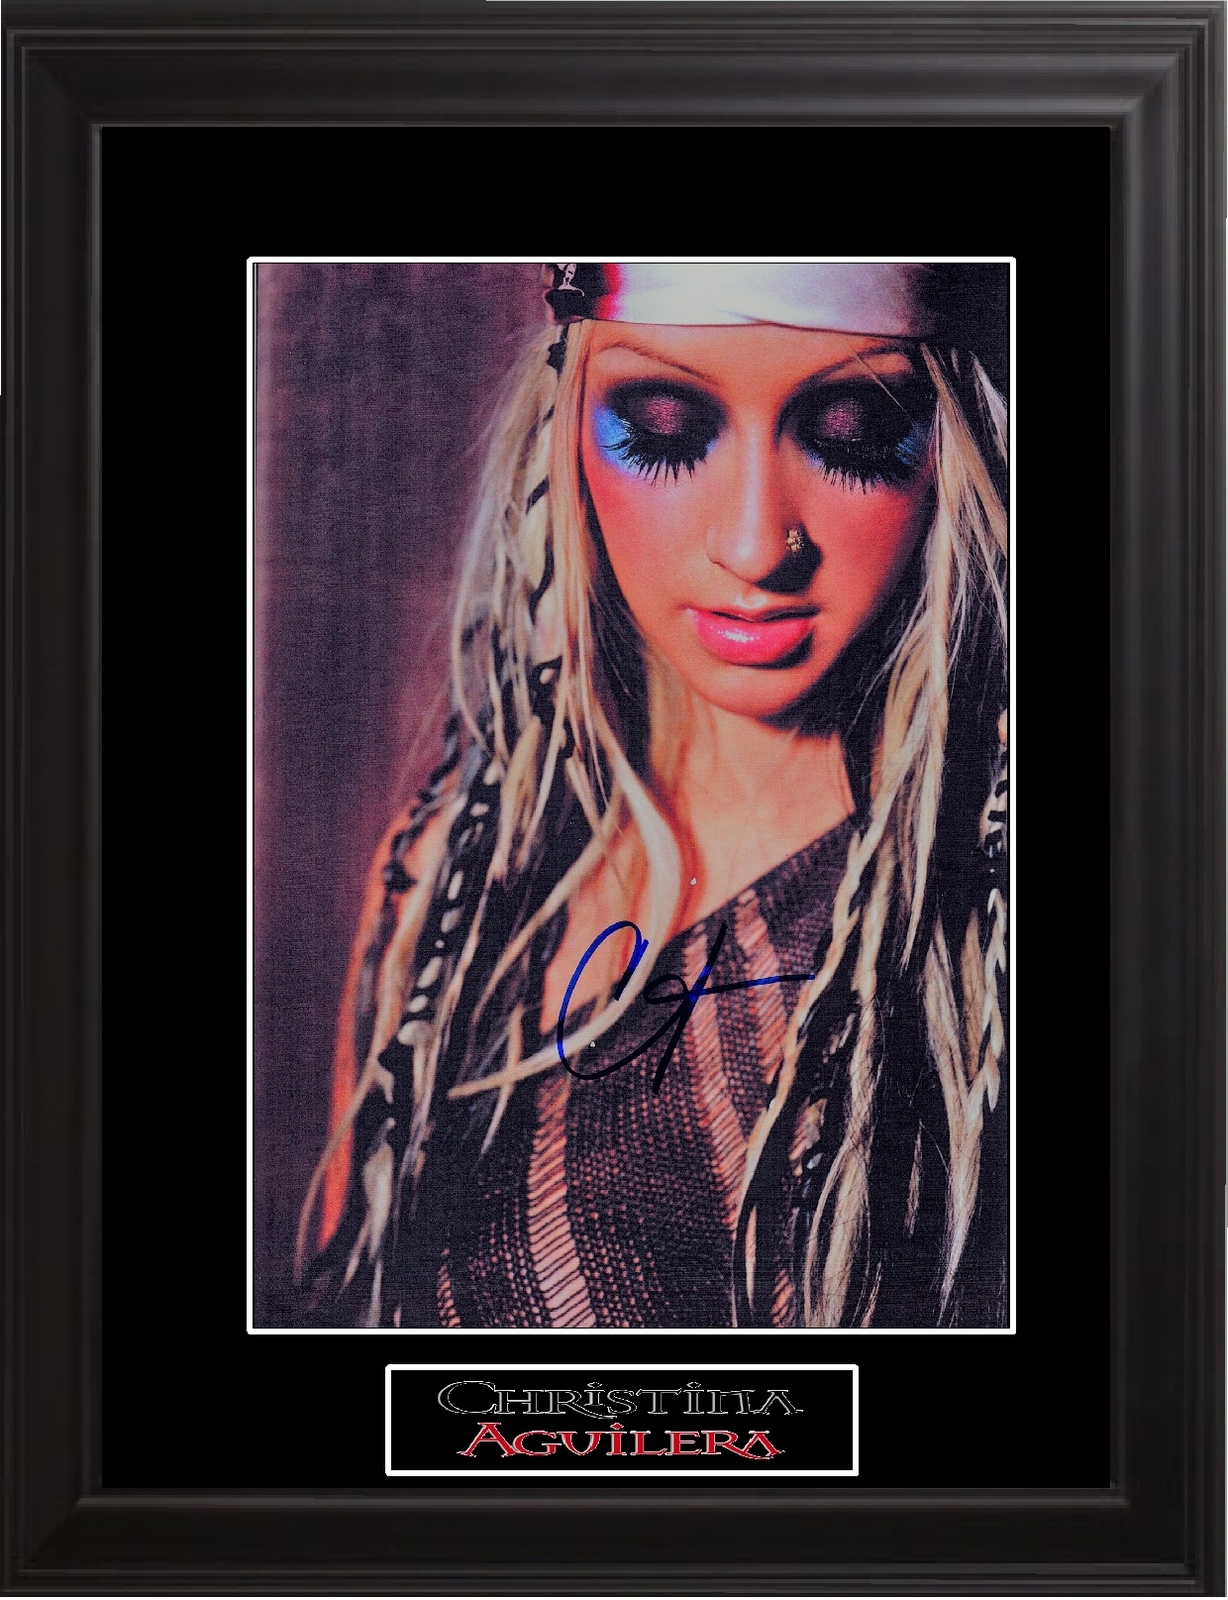 Primary image for Christina Aguilera Autographed Photo